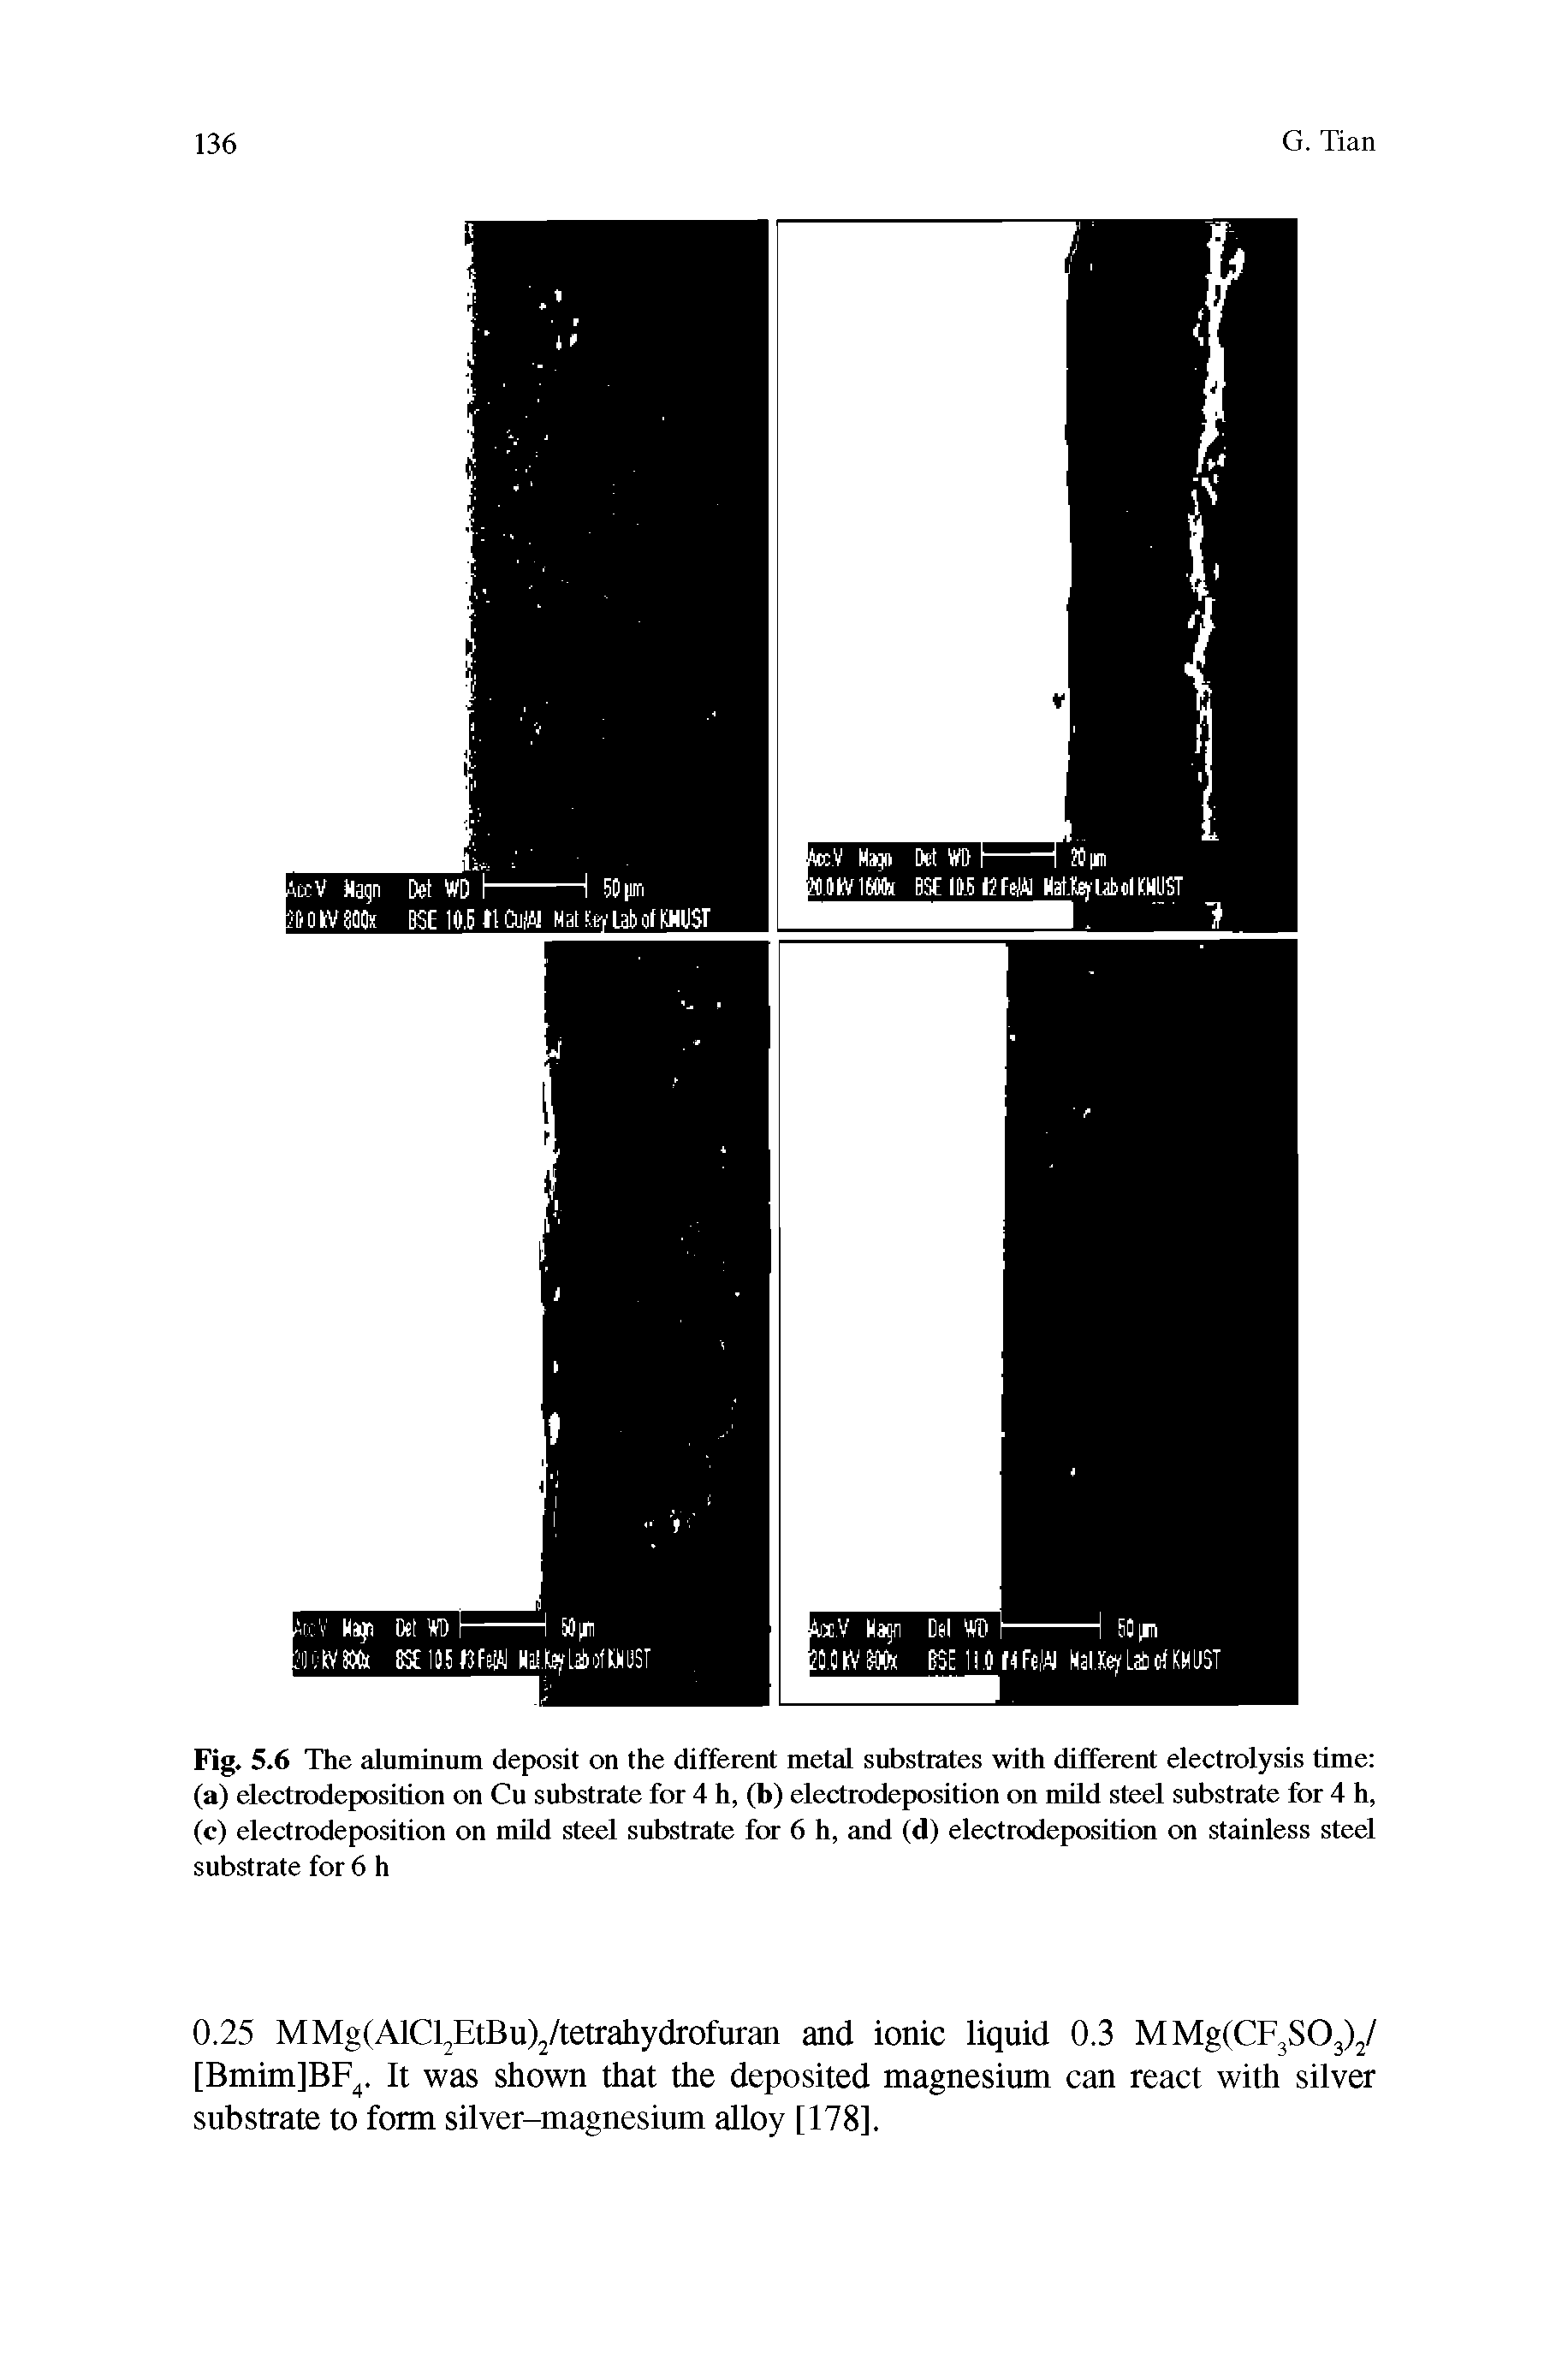 Fig. 5.6 The aluminum deposit on the different metal substrates with different electrolysis time (a) electrodeposition on Cu substrate for 4 h, (b) electrodeposition on nuld steel substrate for 4 h, (c) electrodeposition on mild steel substrate for 6 h, and (d) electrodeposition on stainless steel substrate for 6 h...